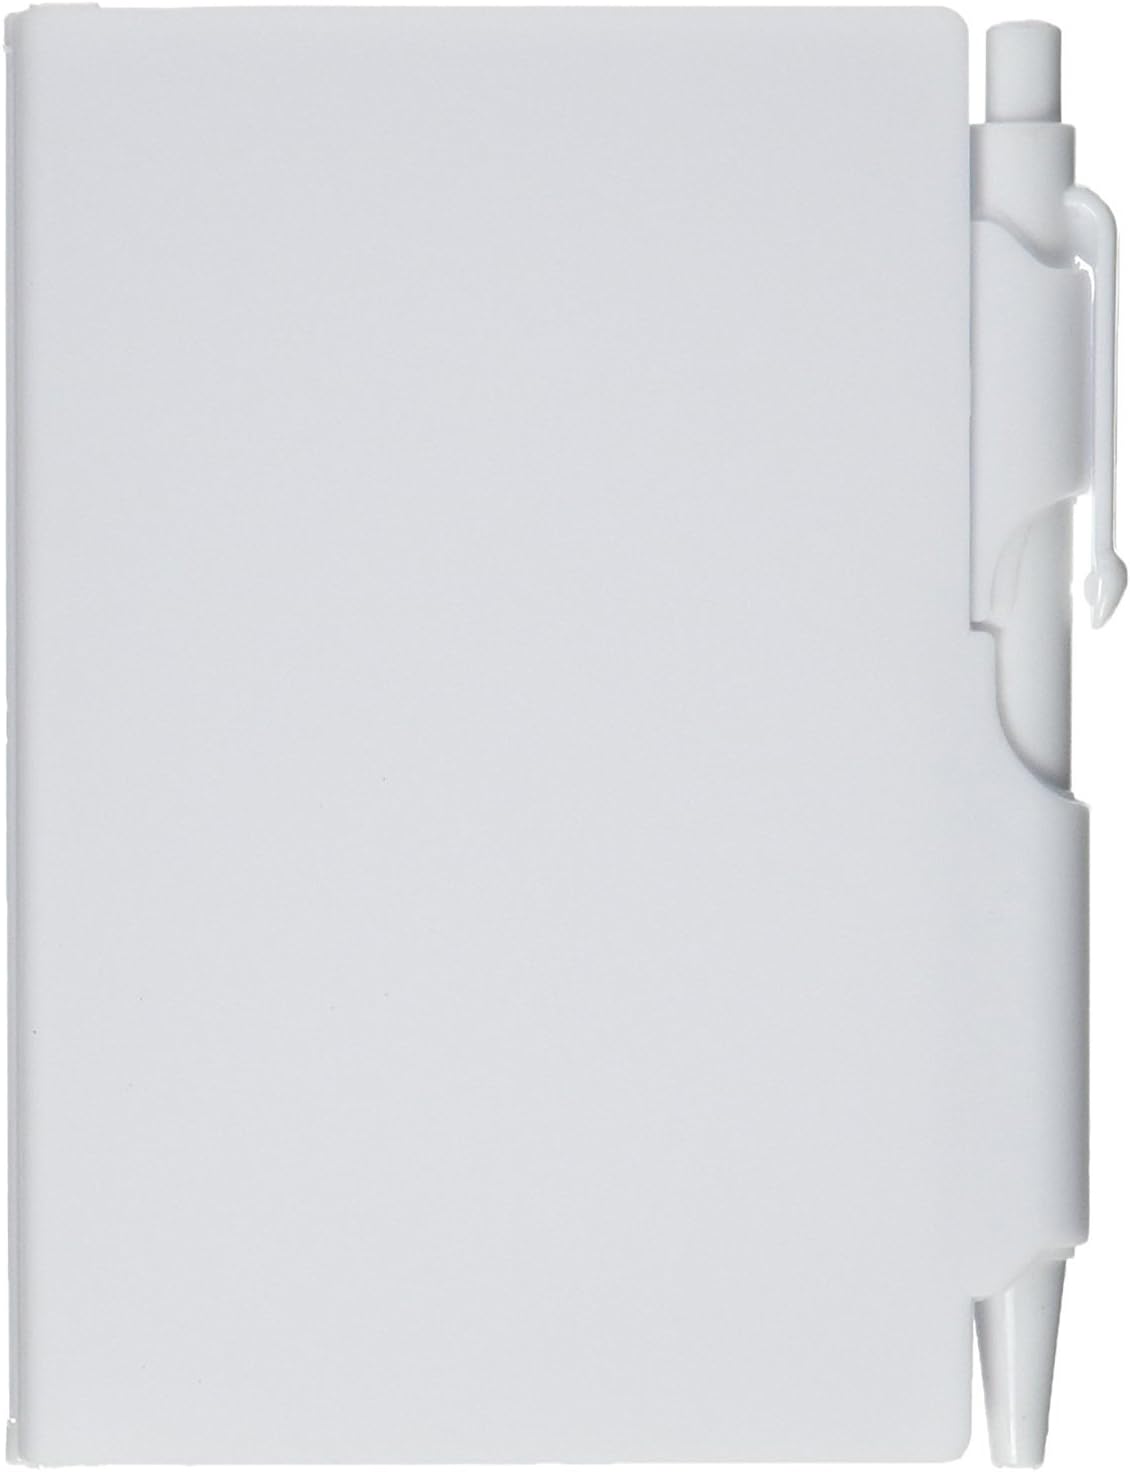 Set of 35 White Notebooks With Pen